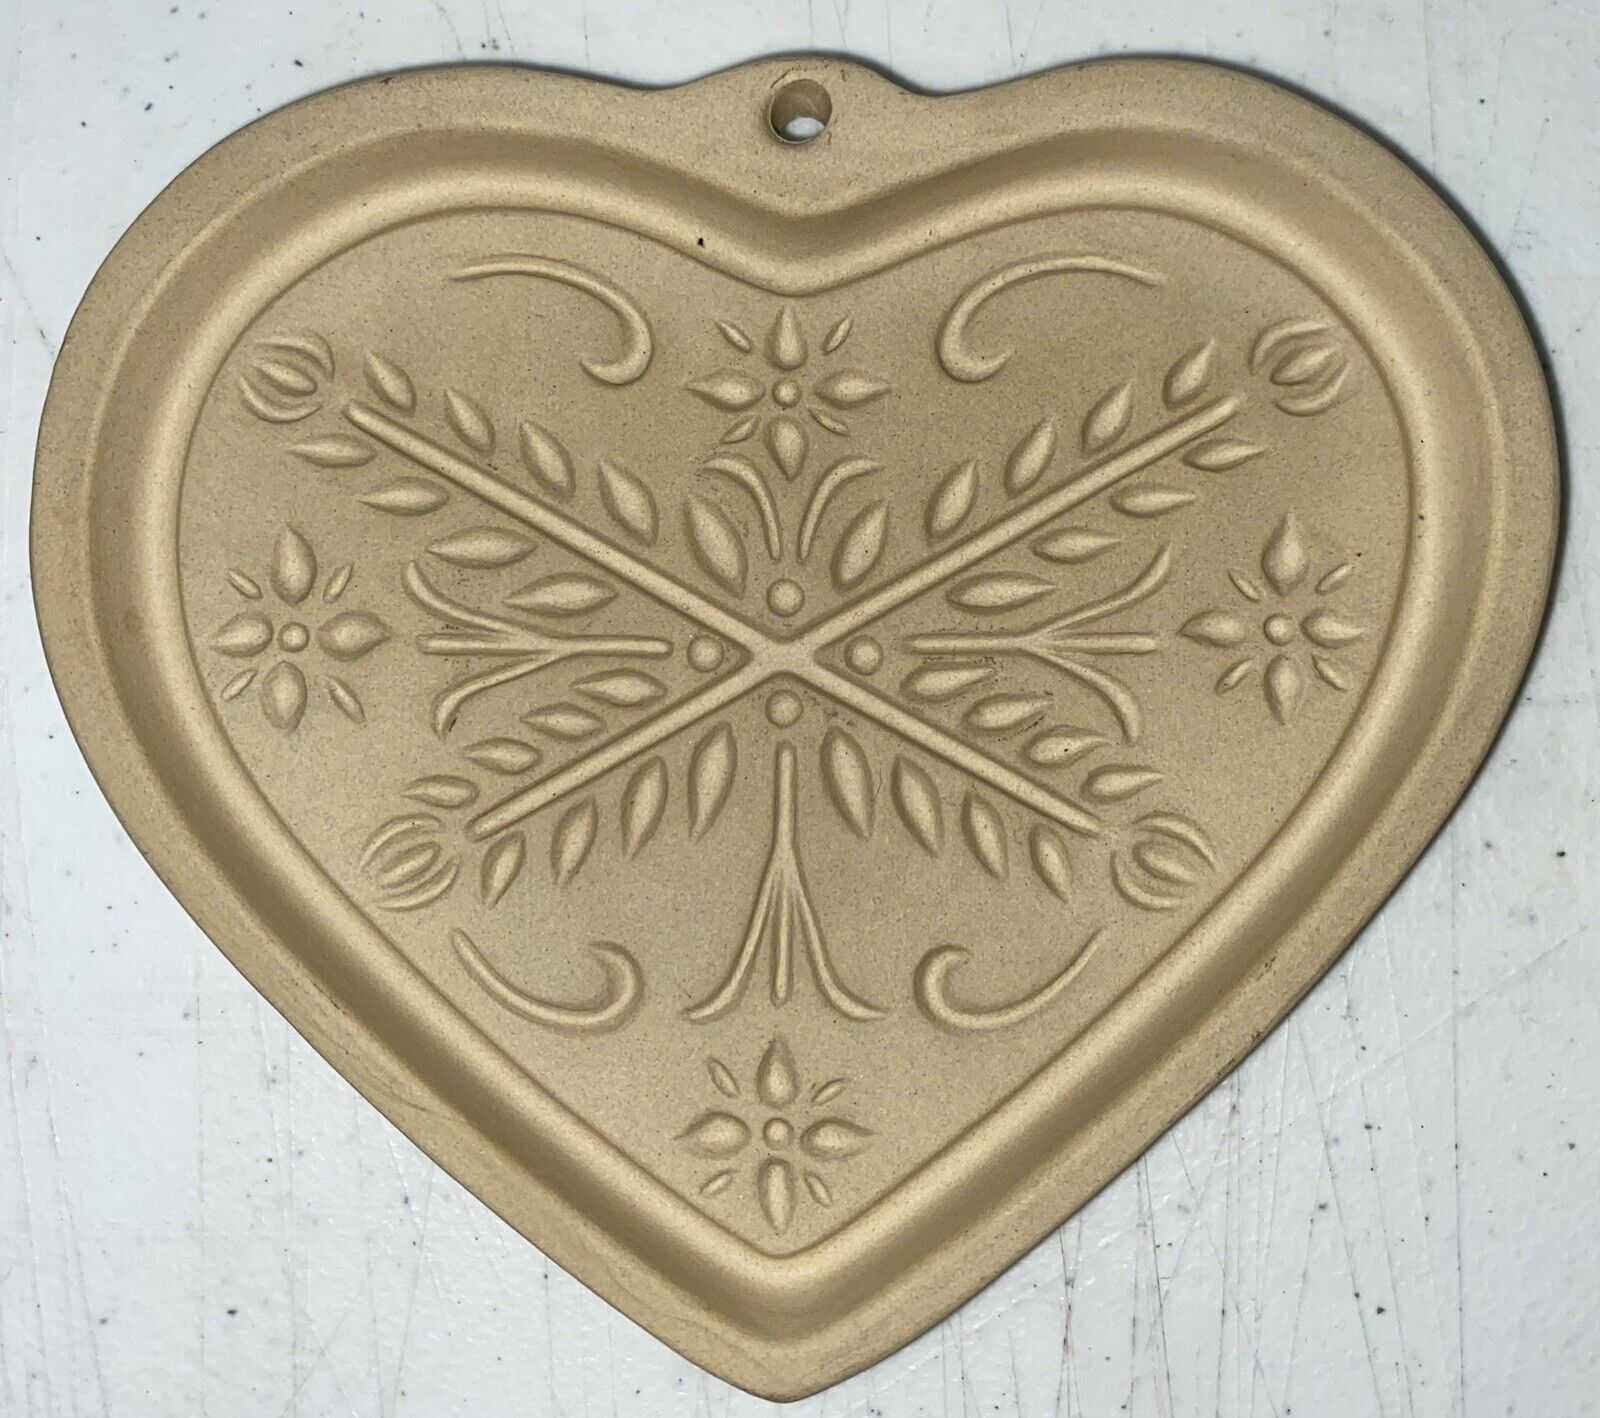 VTG 2000 Pampered Chef 6” Stoneware Anniversary Heart Cookie Mold Made USA